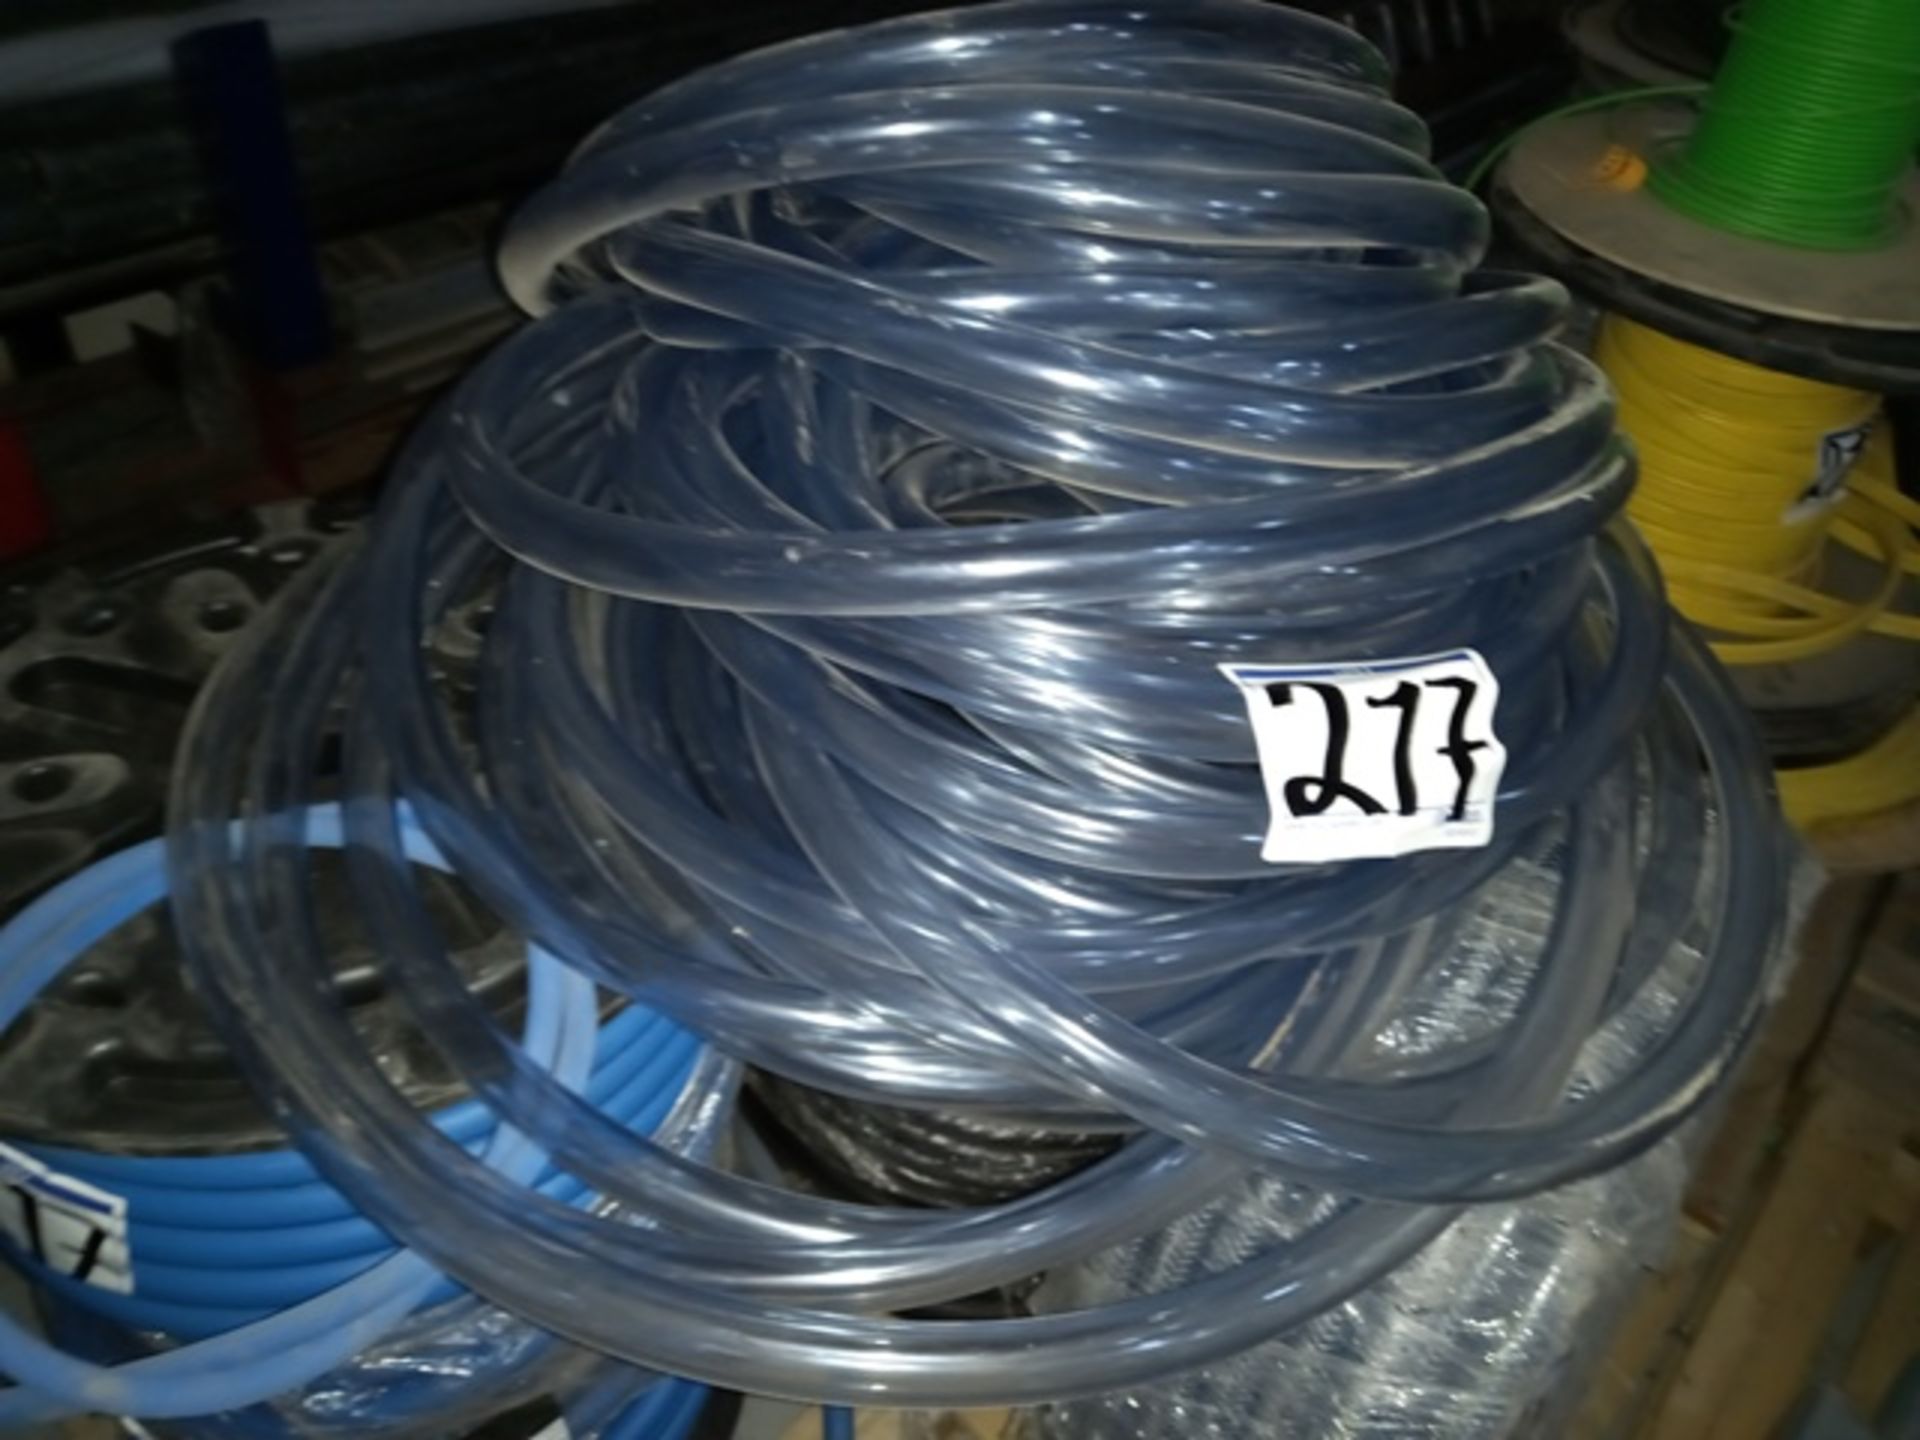 Lot of Plastic Hose Different Sizes - Image 5 of 8